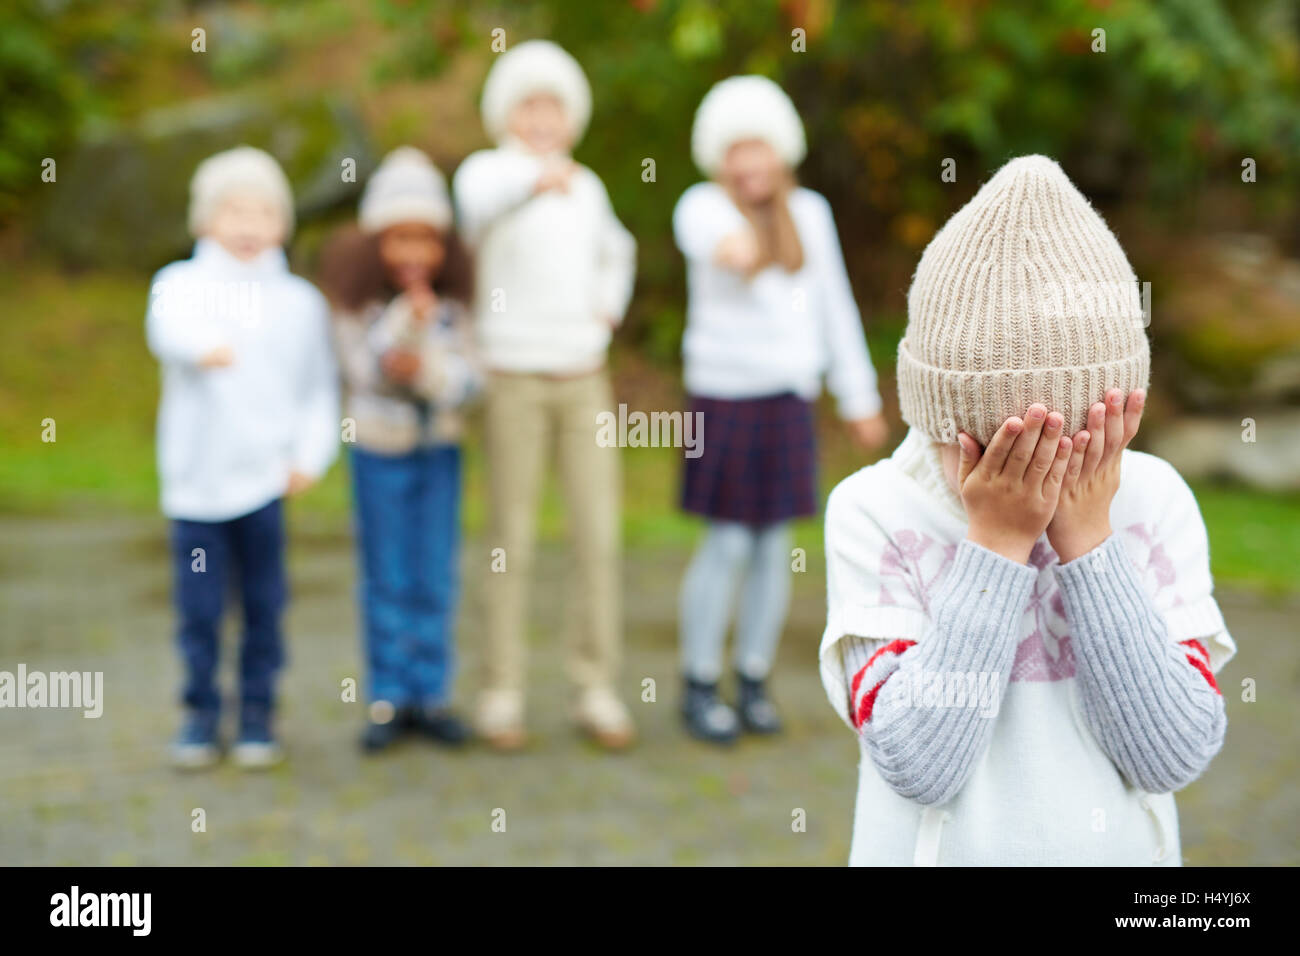 Little boy crying with his face in hands on background of bullying children Stock Photo